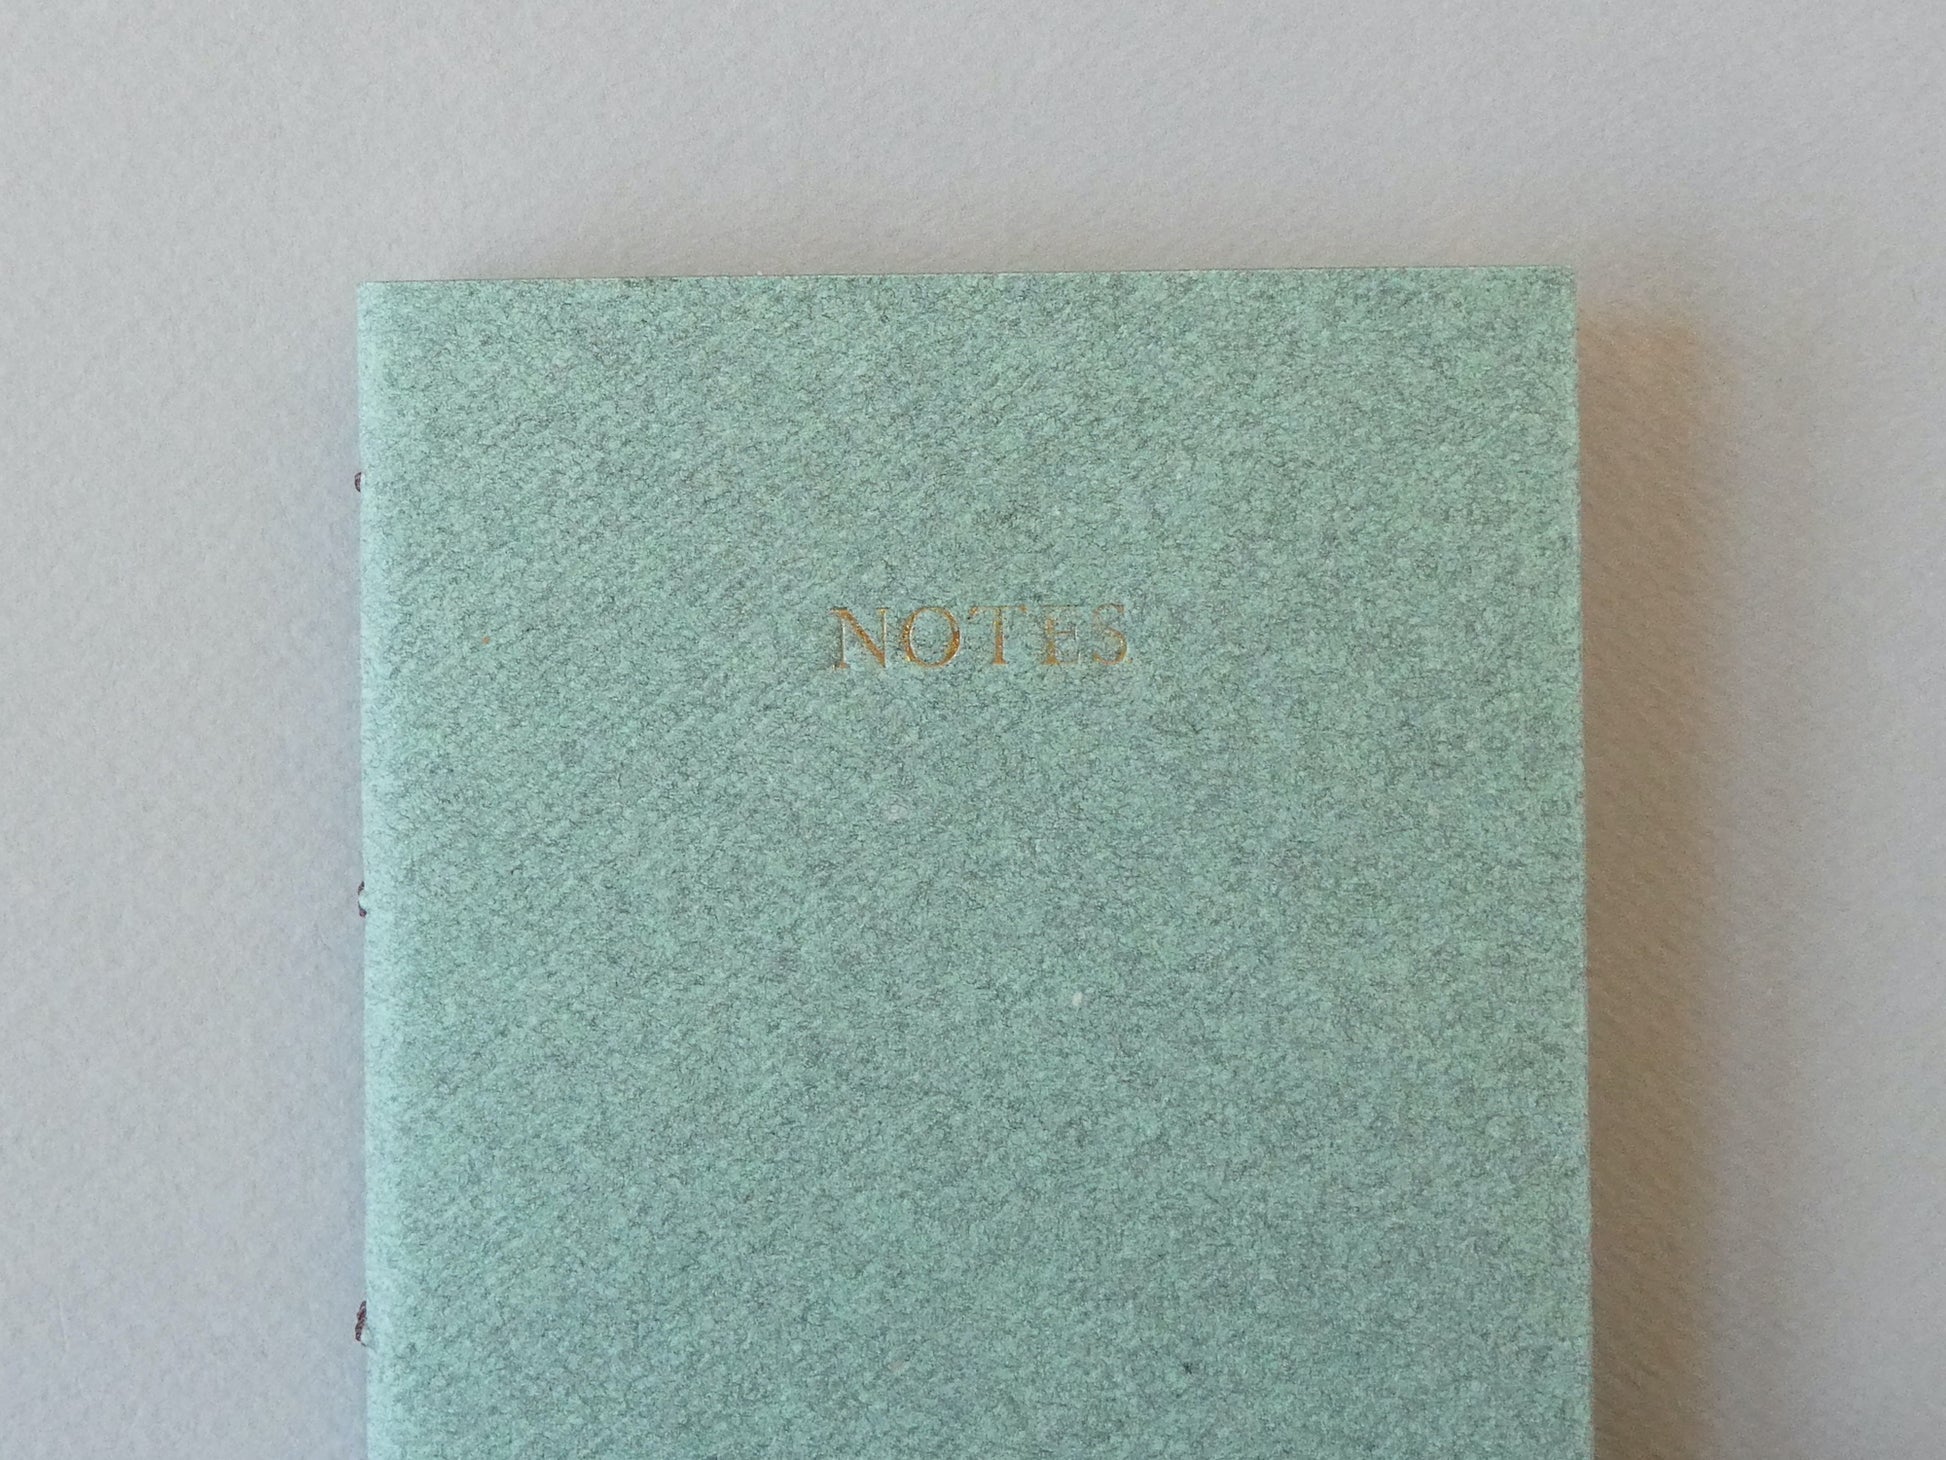 Celandine Books green notebook with gold lettering